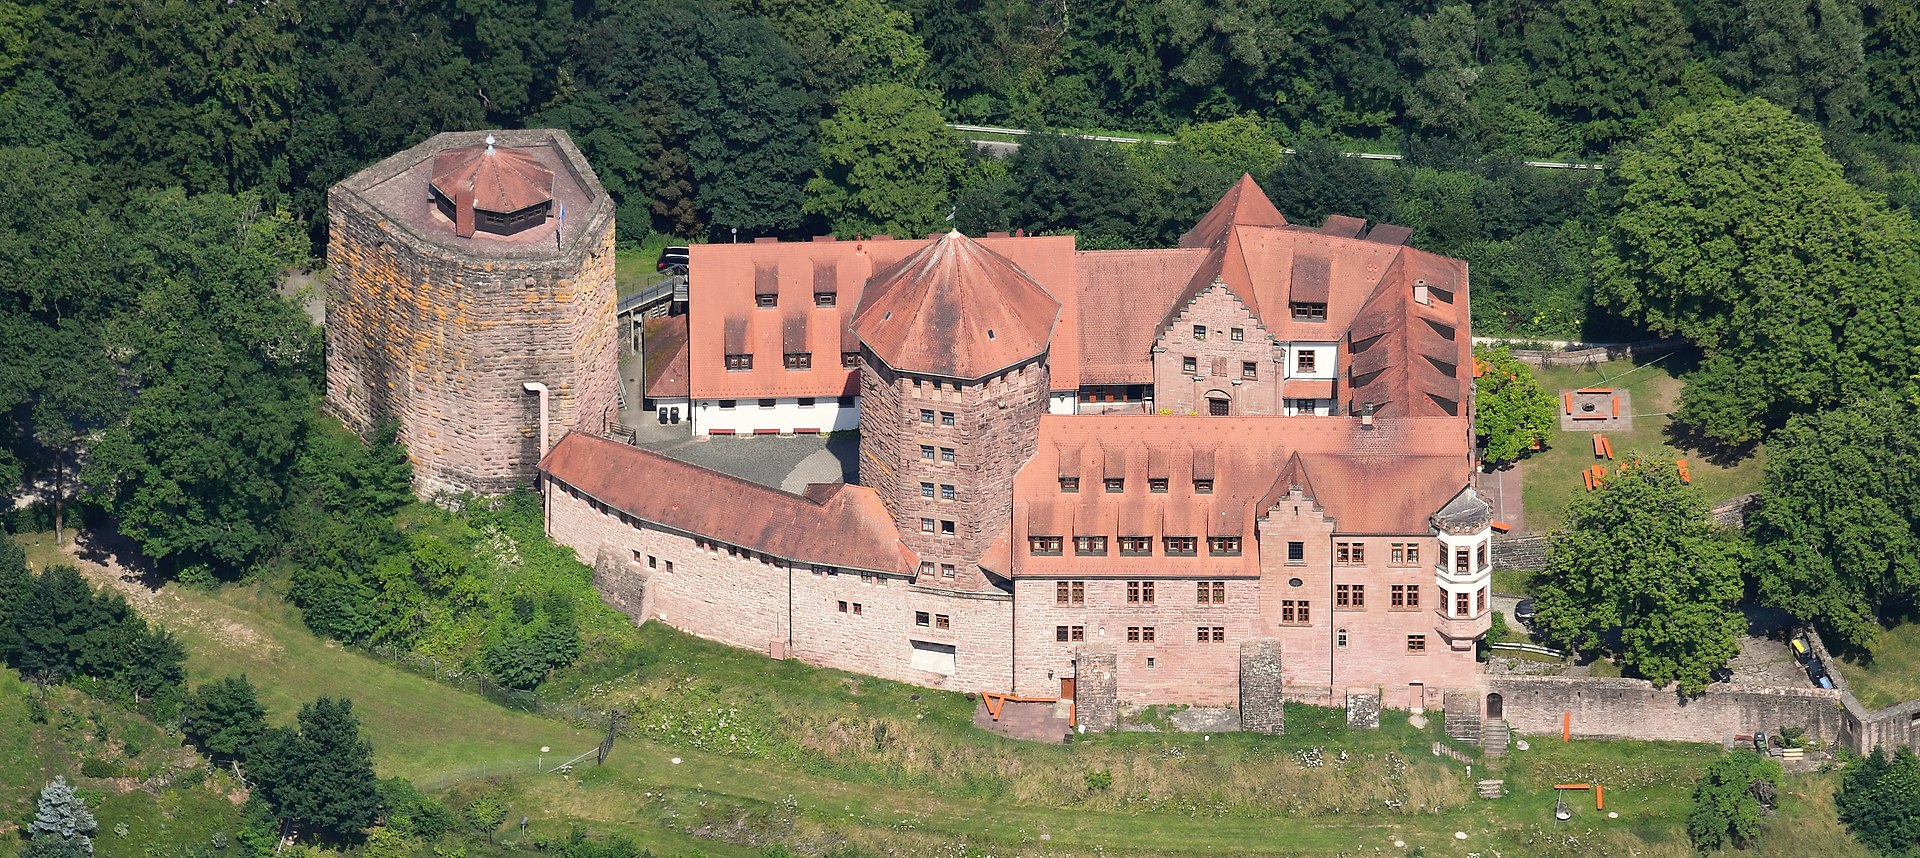 Aerial image of the Rieneck Castle. Photo: Carsten Steger